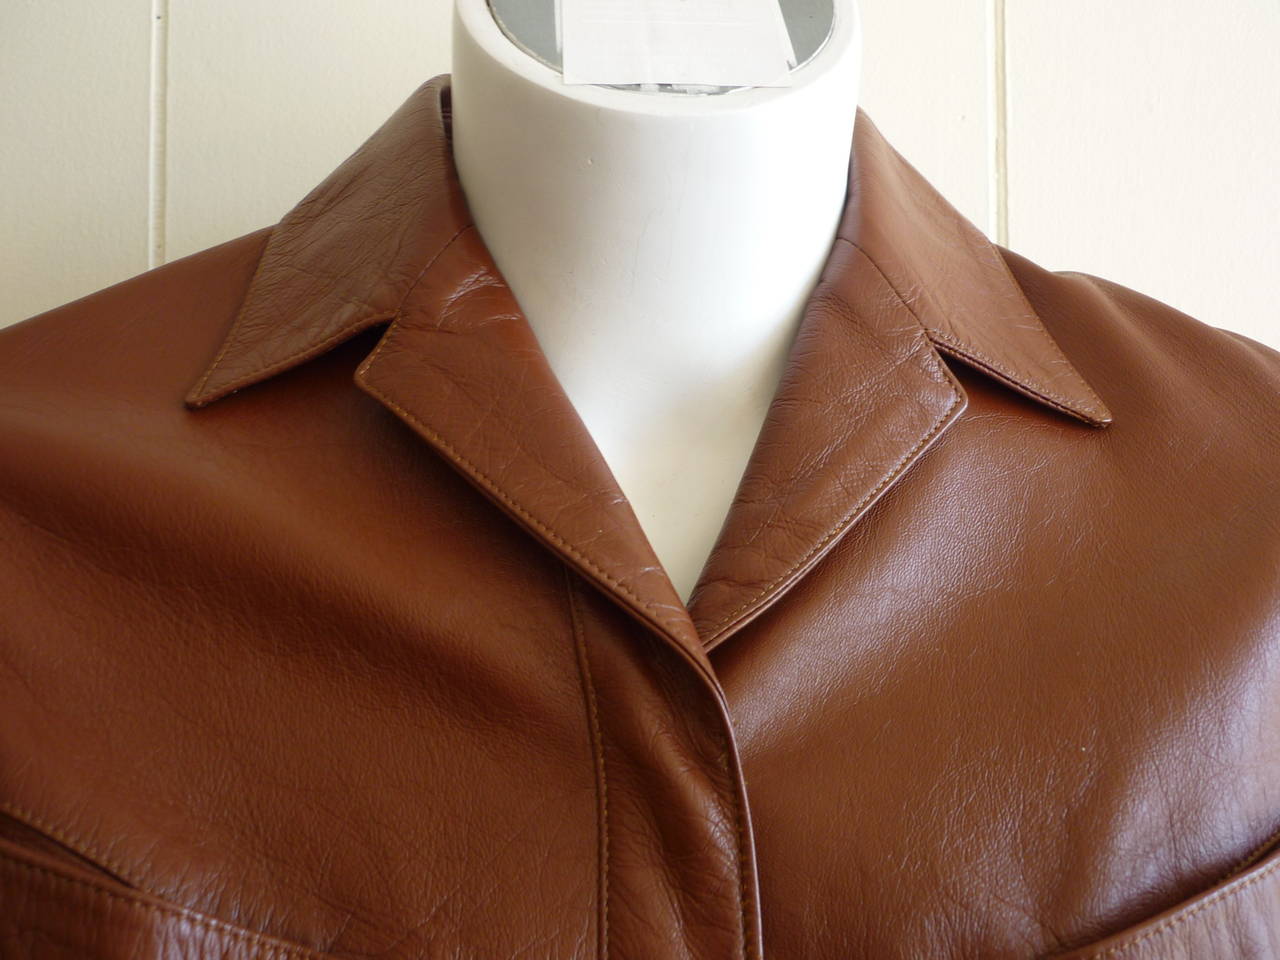 Perfect leather jacket with the iconic snap buttons and slant pockets. The jacket is a warm brown leaning towards orange tones and is embellished by two side buckles.